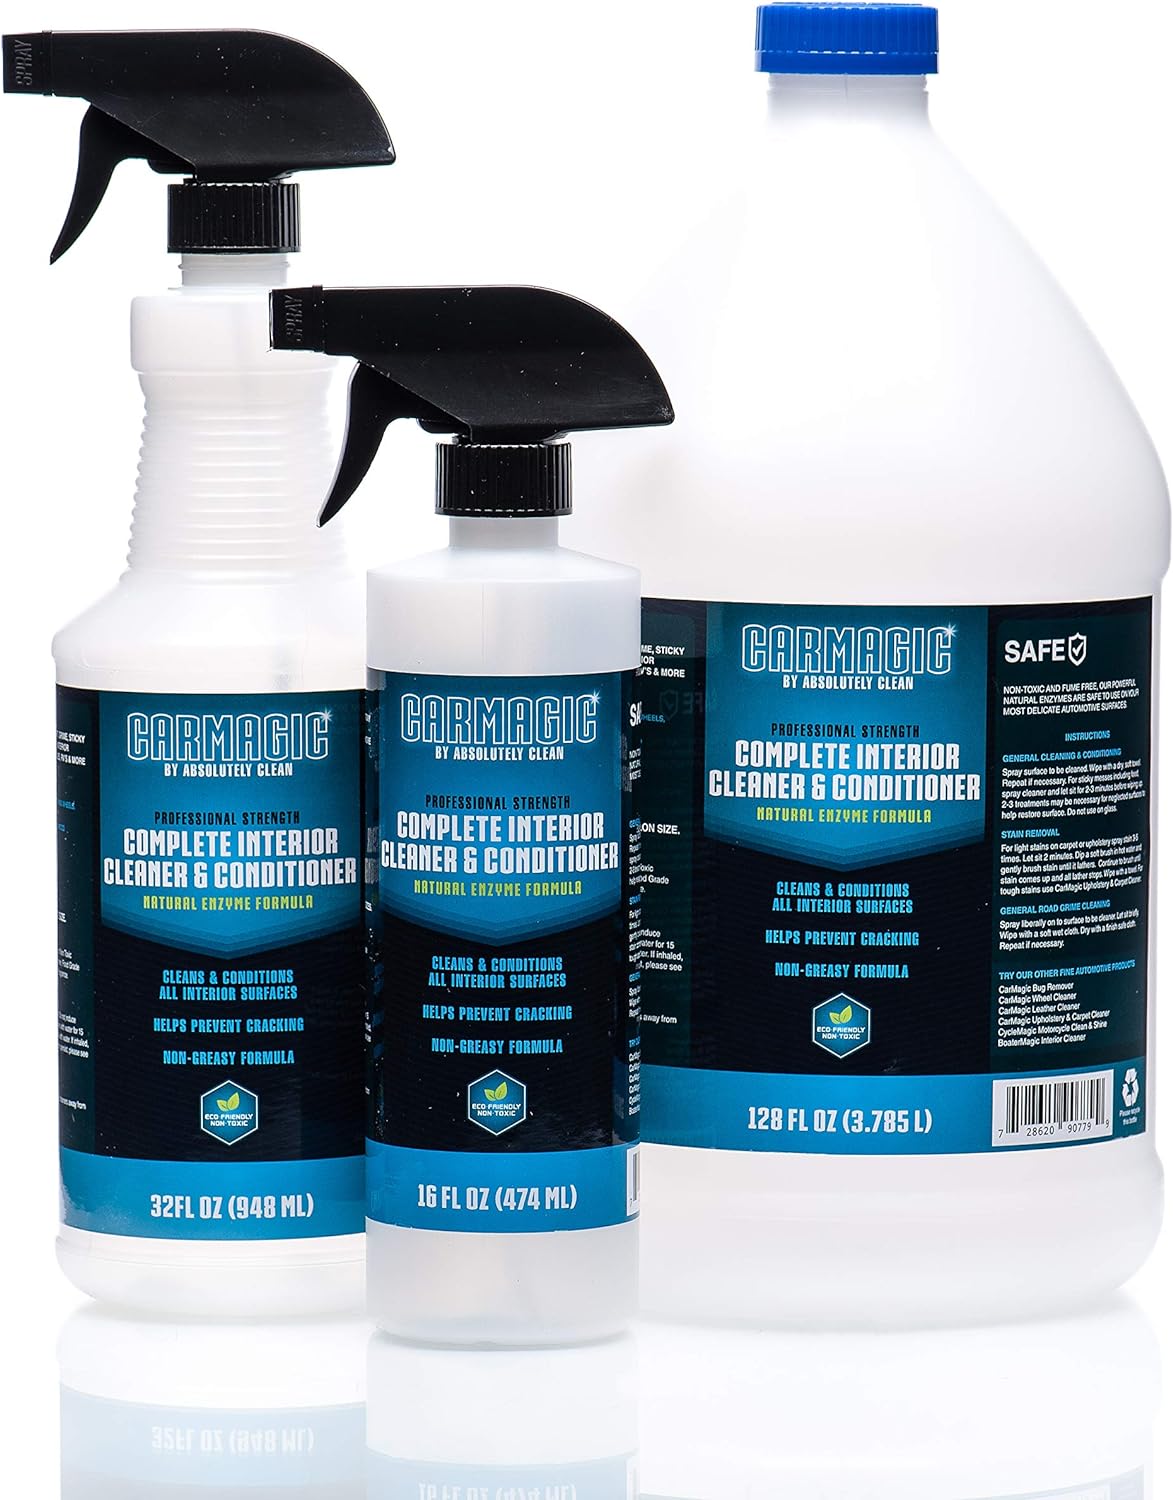 Absolutely Clean Car Magic Complete Interior Cleaner and Conditioner - Multi-Purpose Car Interior Cleaner | Cleans Leather, Rubber, Vinyl